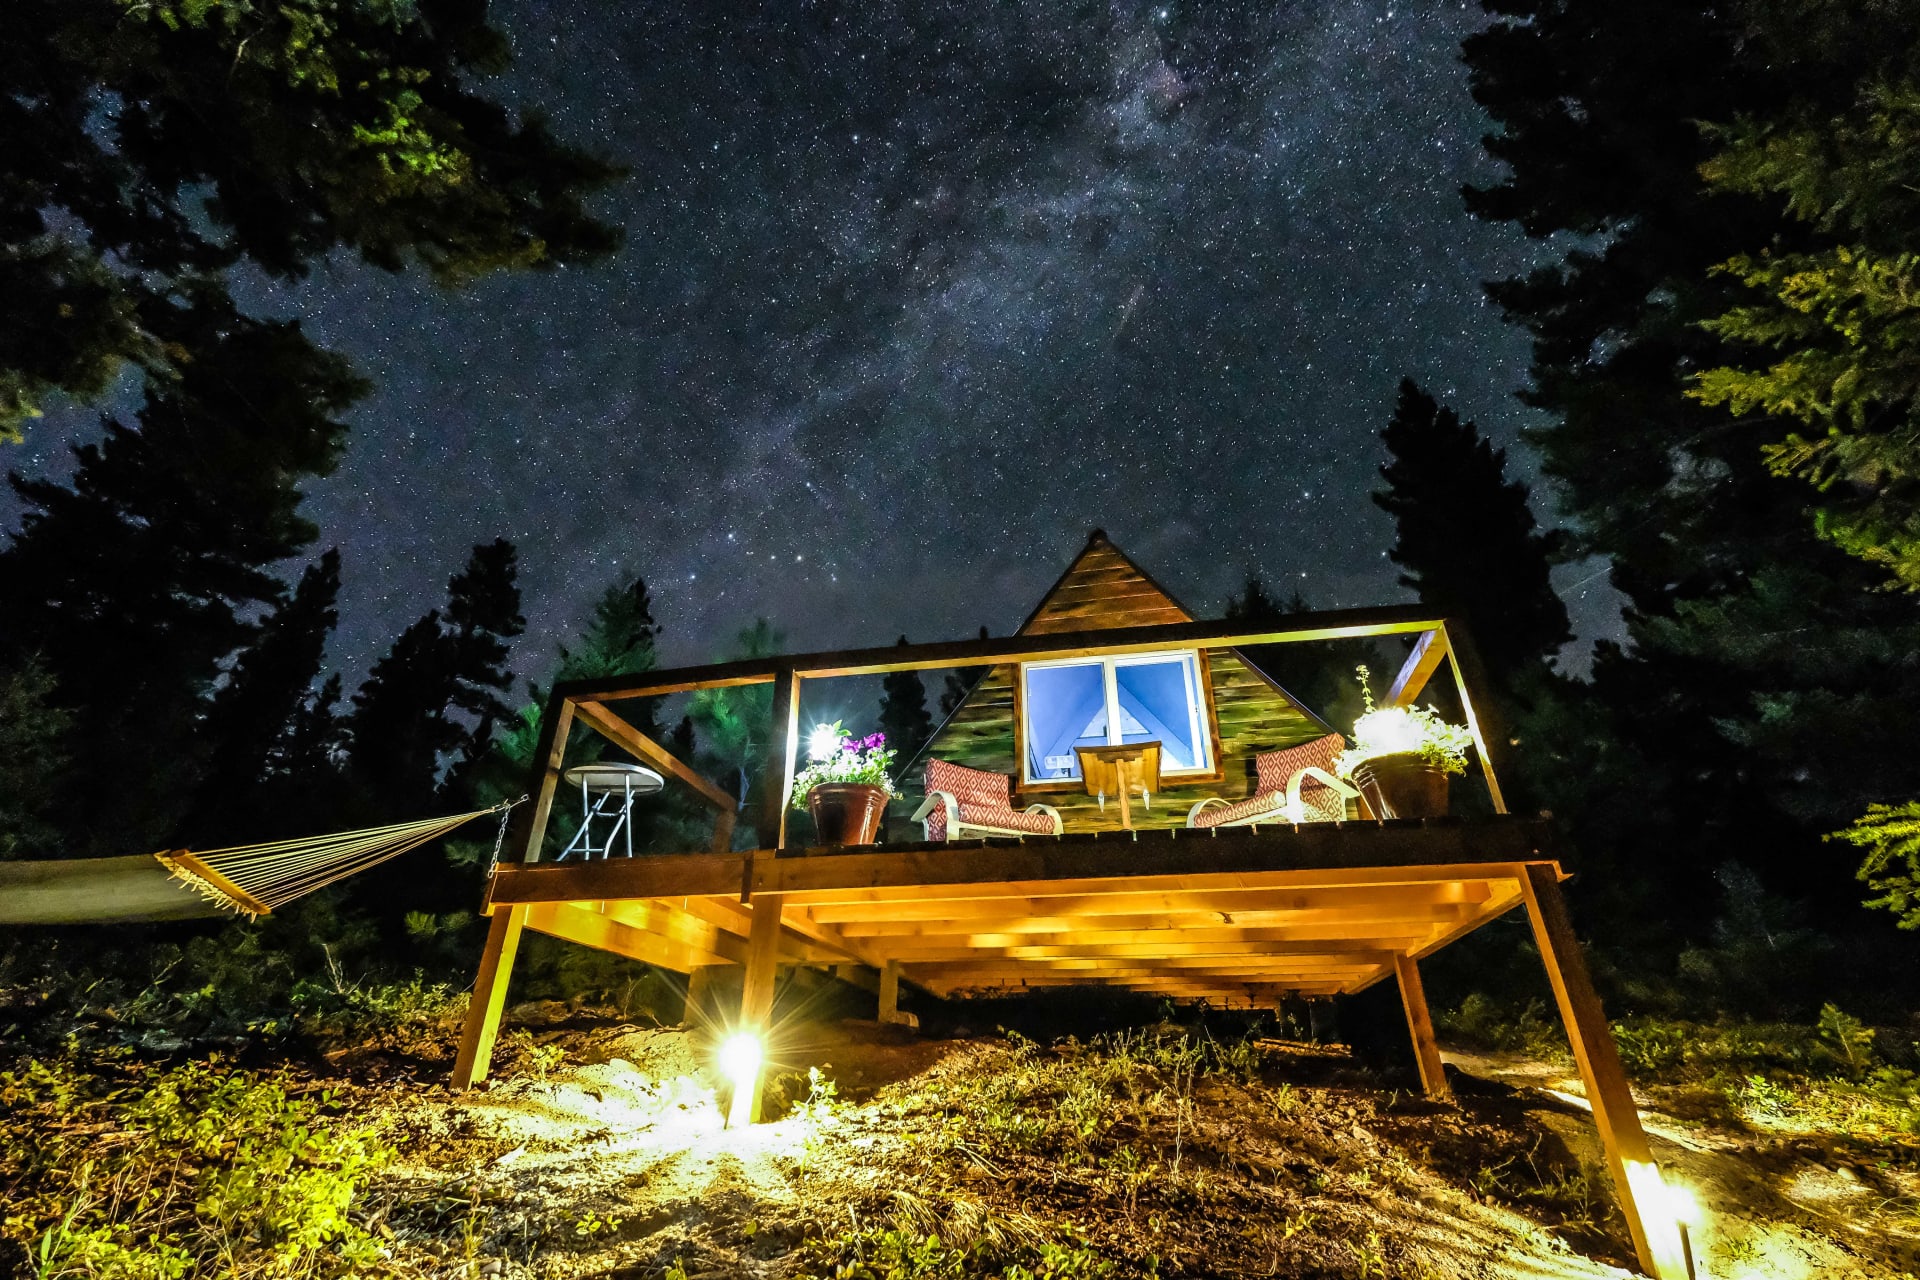 Enjoy your personal view of the Montana sky without having to leave your bed when you're indoors. Or take a walk outside for the ultimate jaw drop!